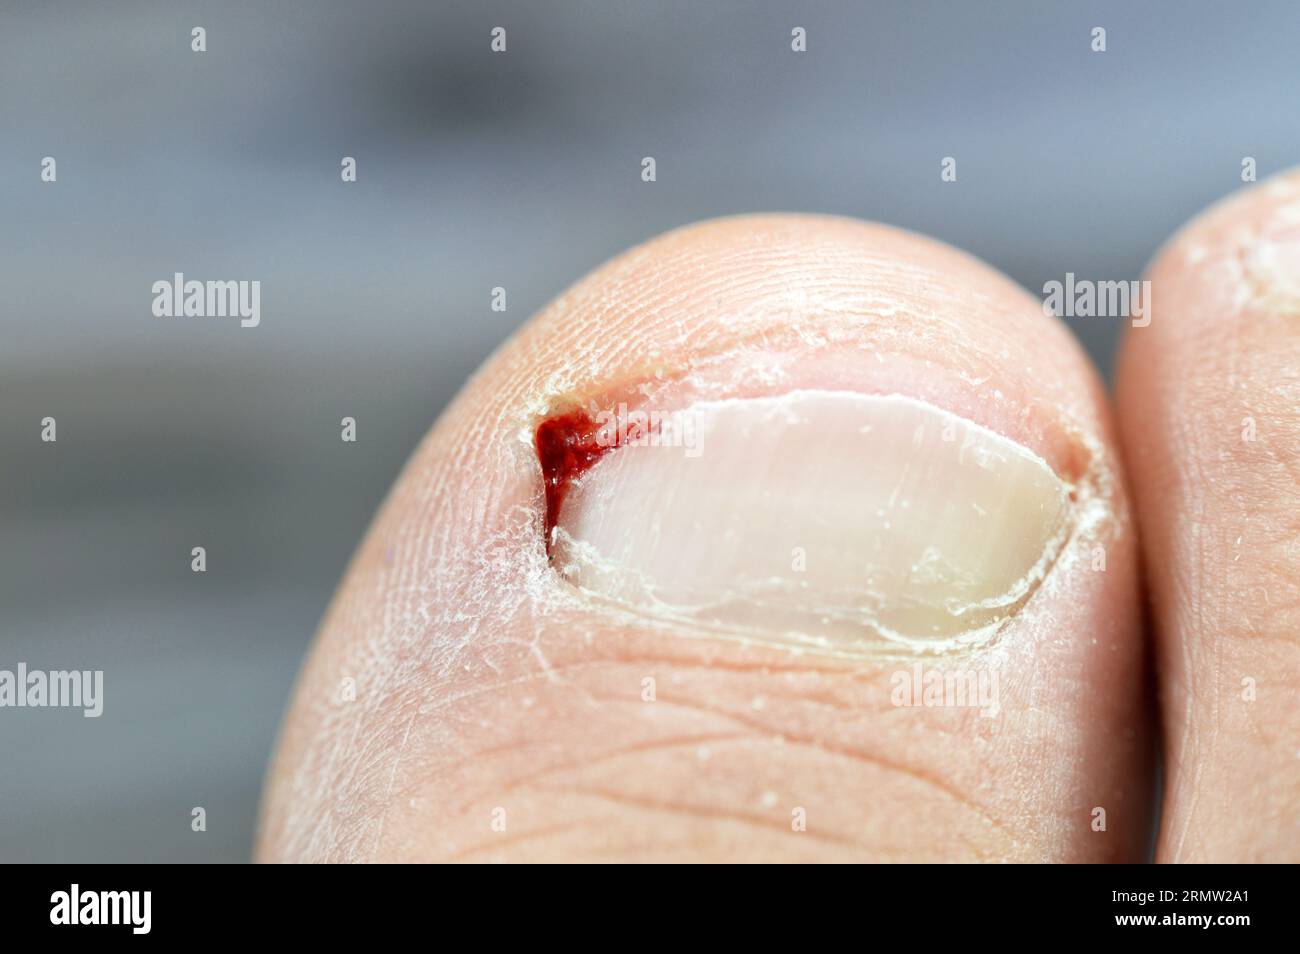 Bleeding of the big toe of the right foot, insult of the foot toe resulting in a bleeding wound that needs care and bandage, blood on toenail that nee Stock Photo